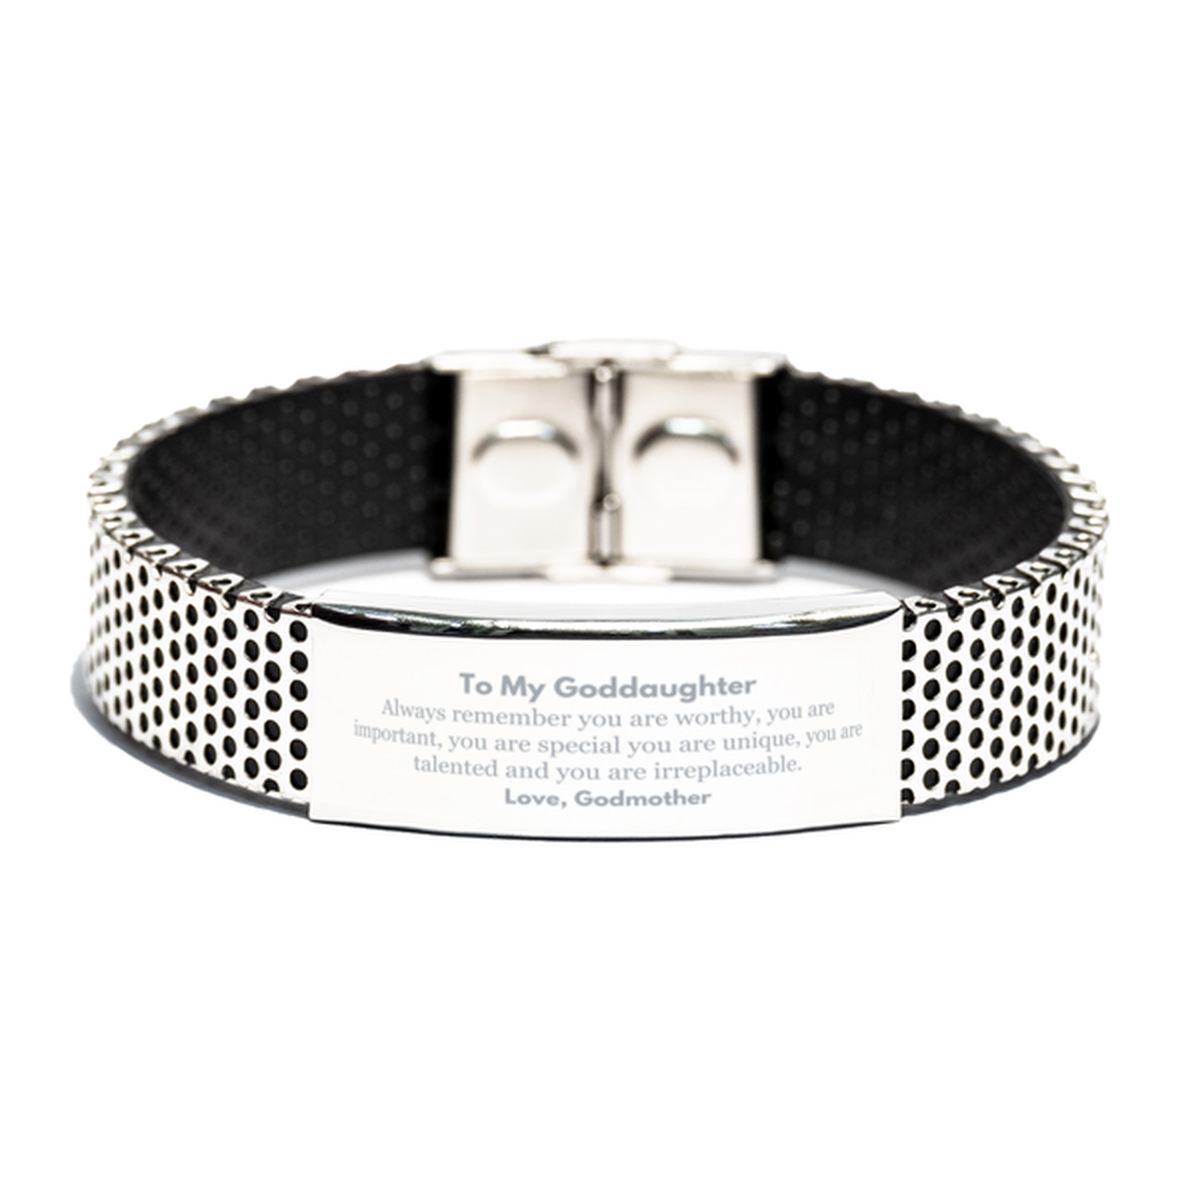 Goddaughter Birthday Gifts from Godmother, Inspirational Stainless Steel Bracelet for Goddaughter Christmas Graduation Gifts for Goddaughter Always remember you are worthy, you are important. Love, Godmother